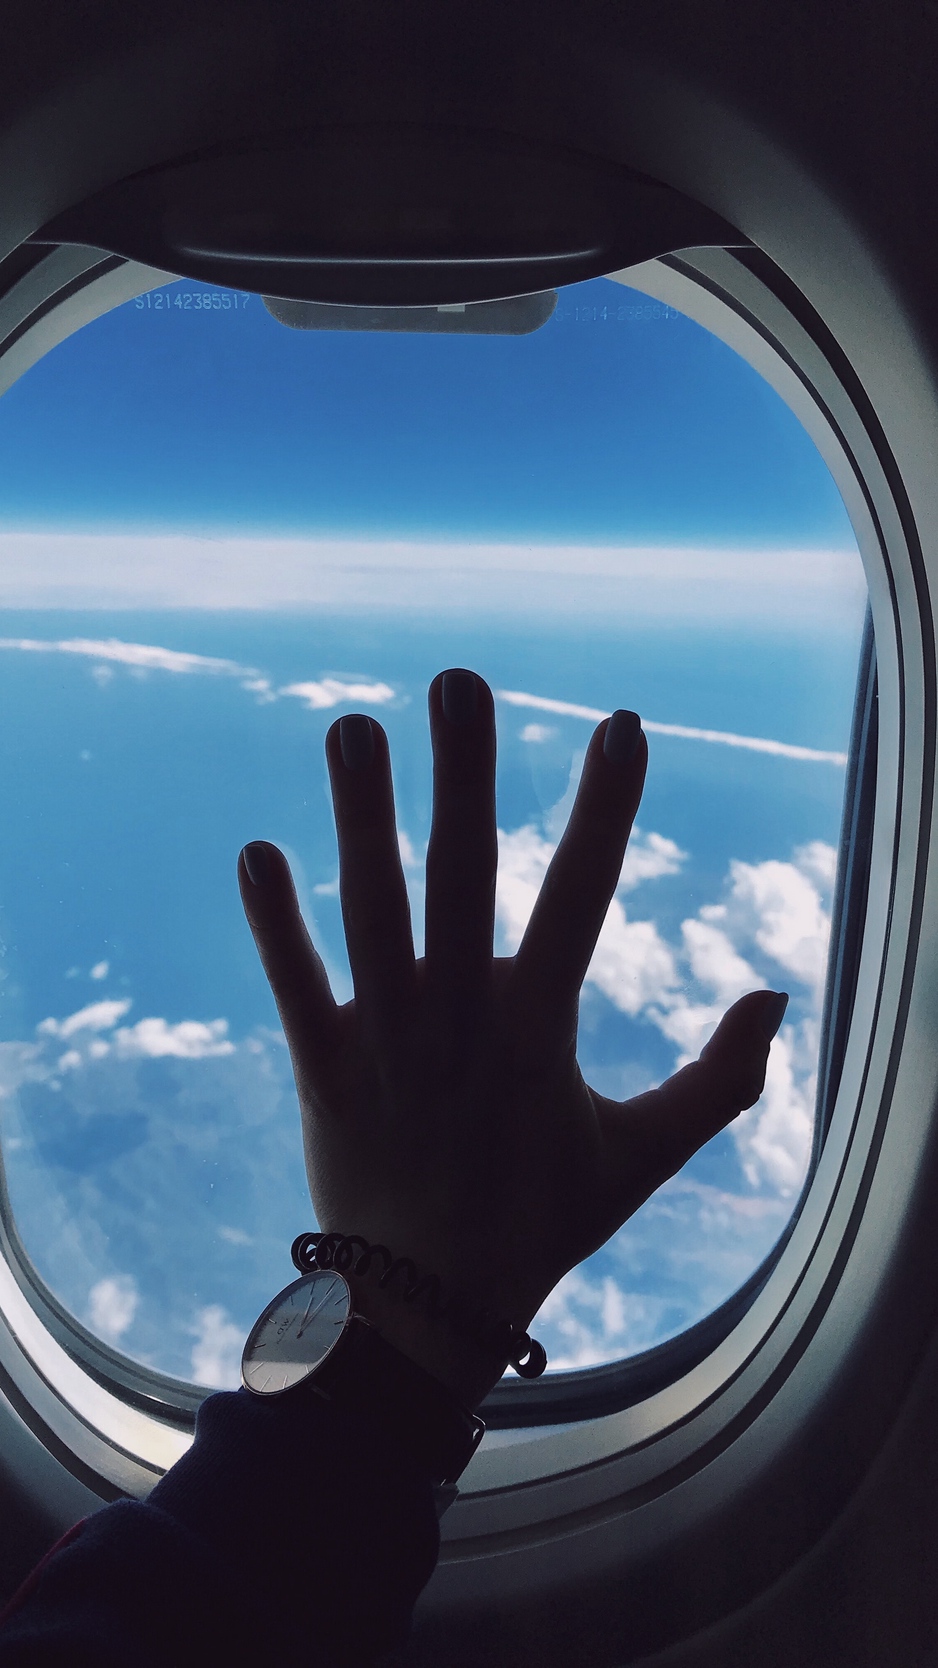 Download Wallpaper Porthole Hand Airplane Window - Iphone 7 Airplane Window - HD Wallpaper 